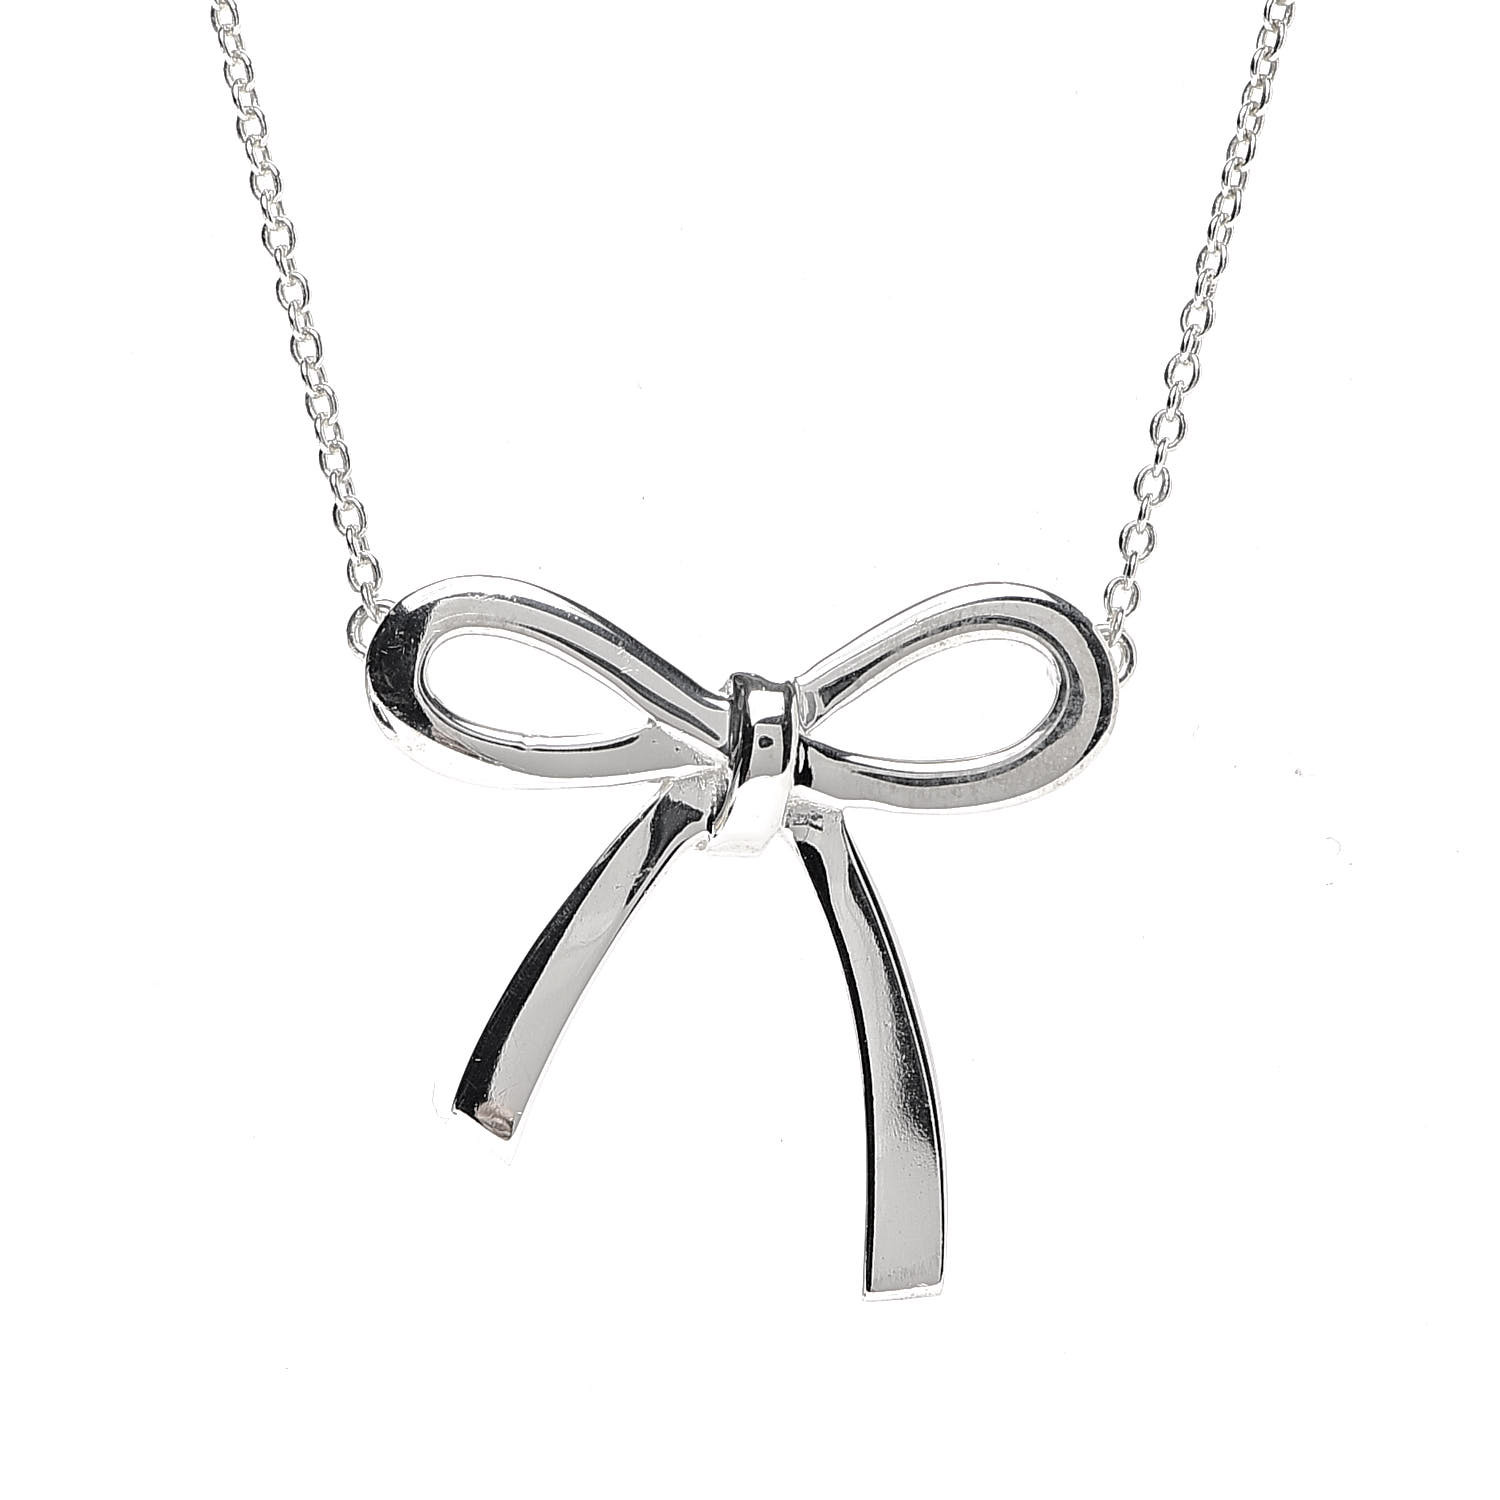 TIFFANY Sterling Silver Bow Pendant Necklace 631152 | FASHIONPHILE